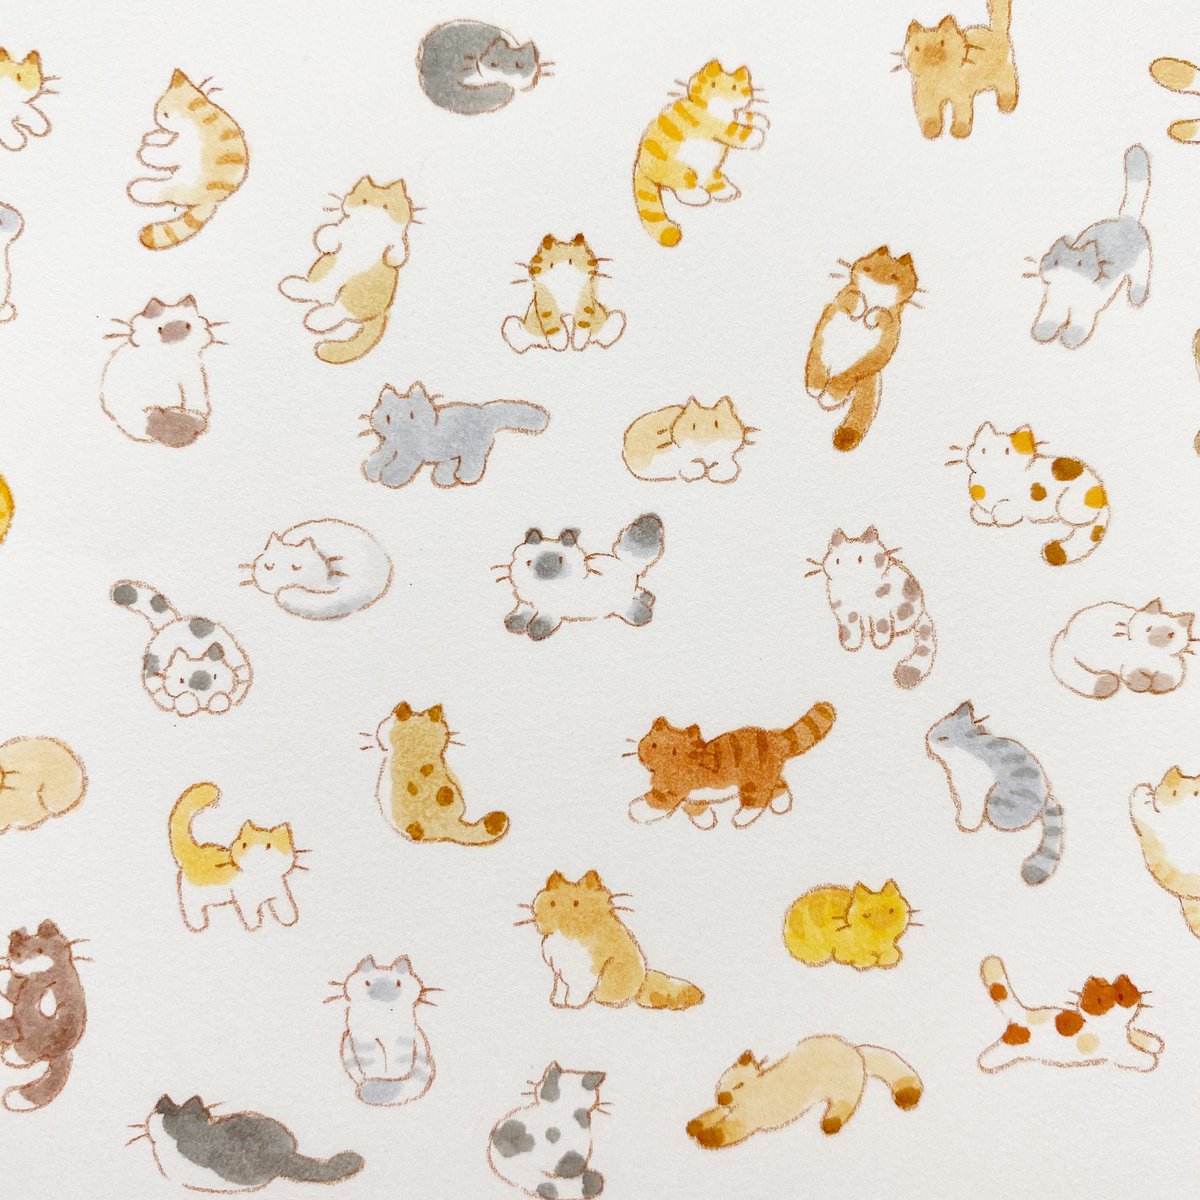 too many cat no humans calico animal marker animal focus  illustration images